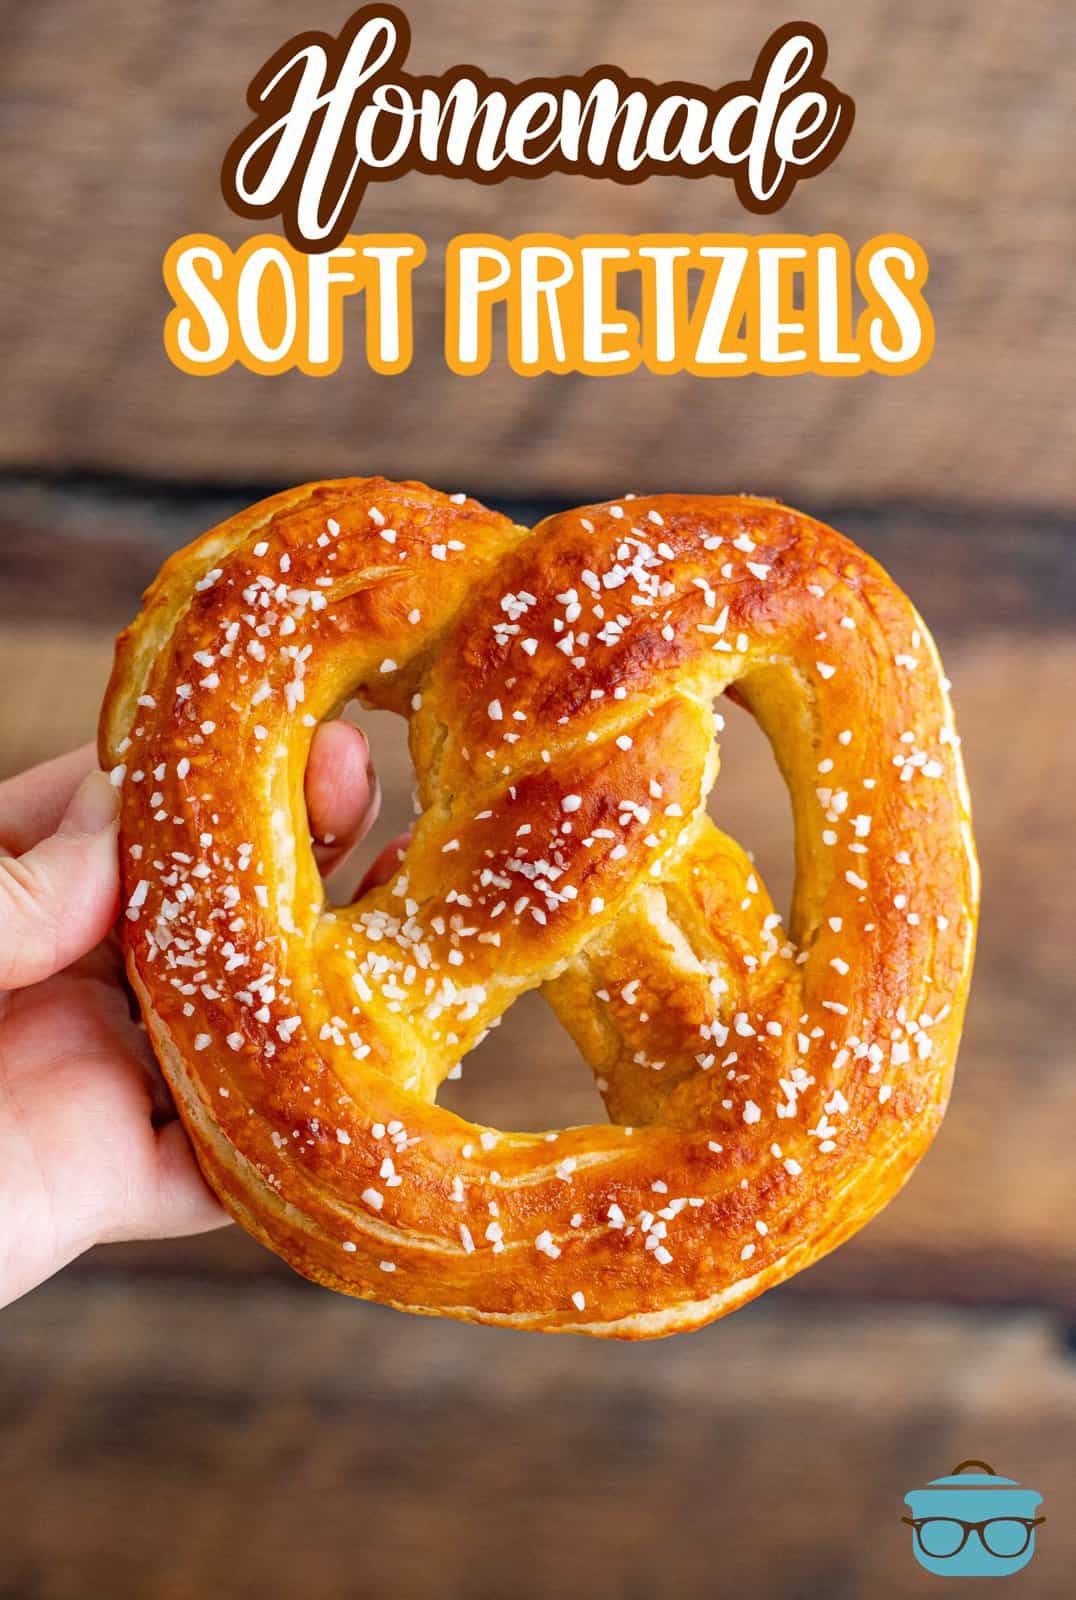 Pinterest image of hand holding up one of the Homemade Soft Pretzels.